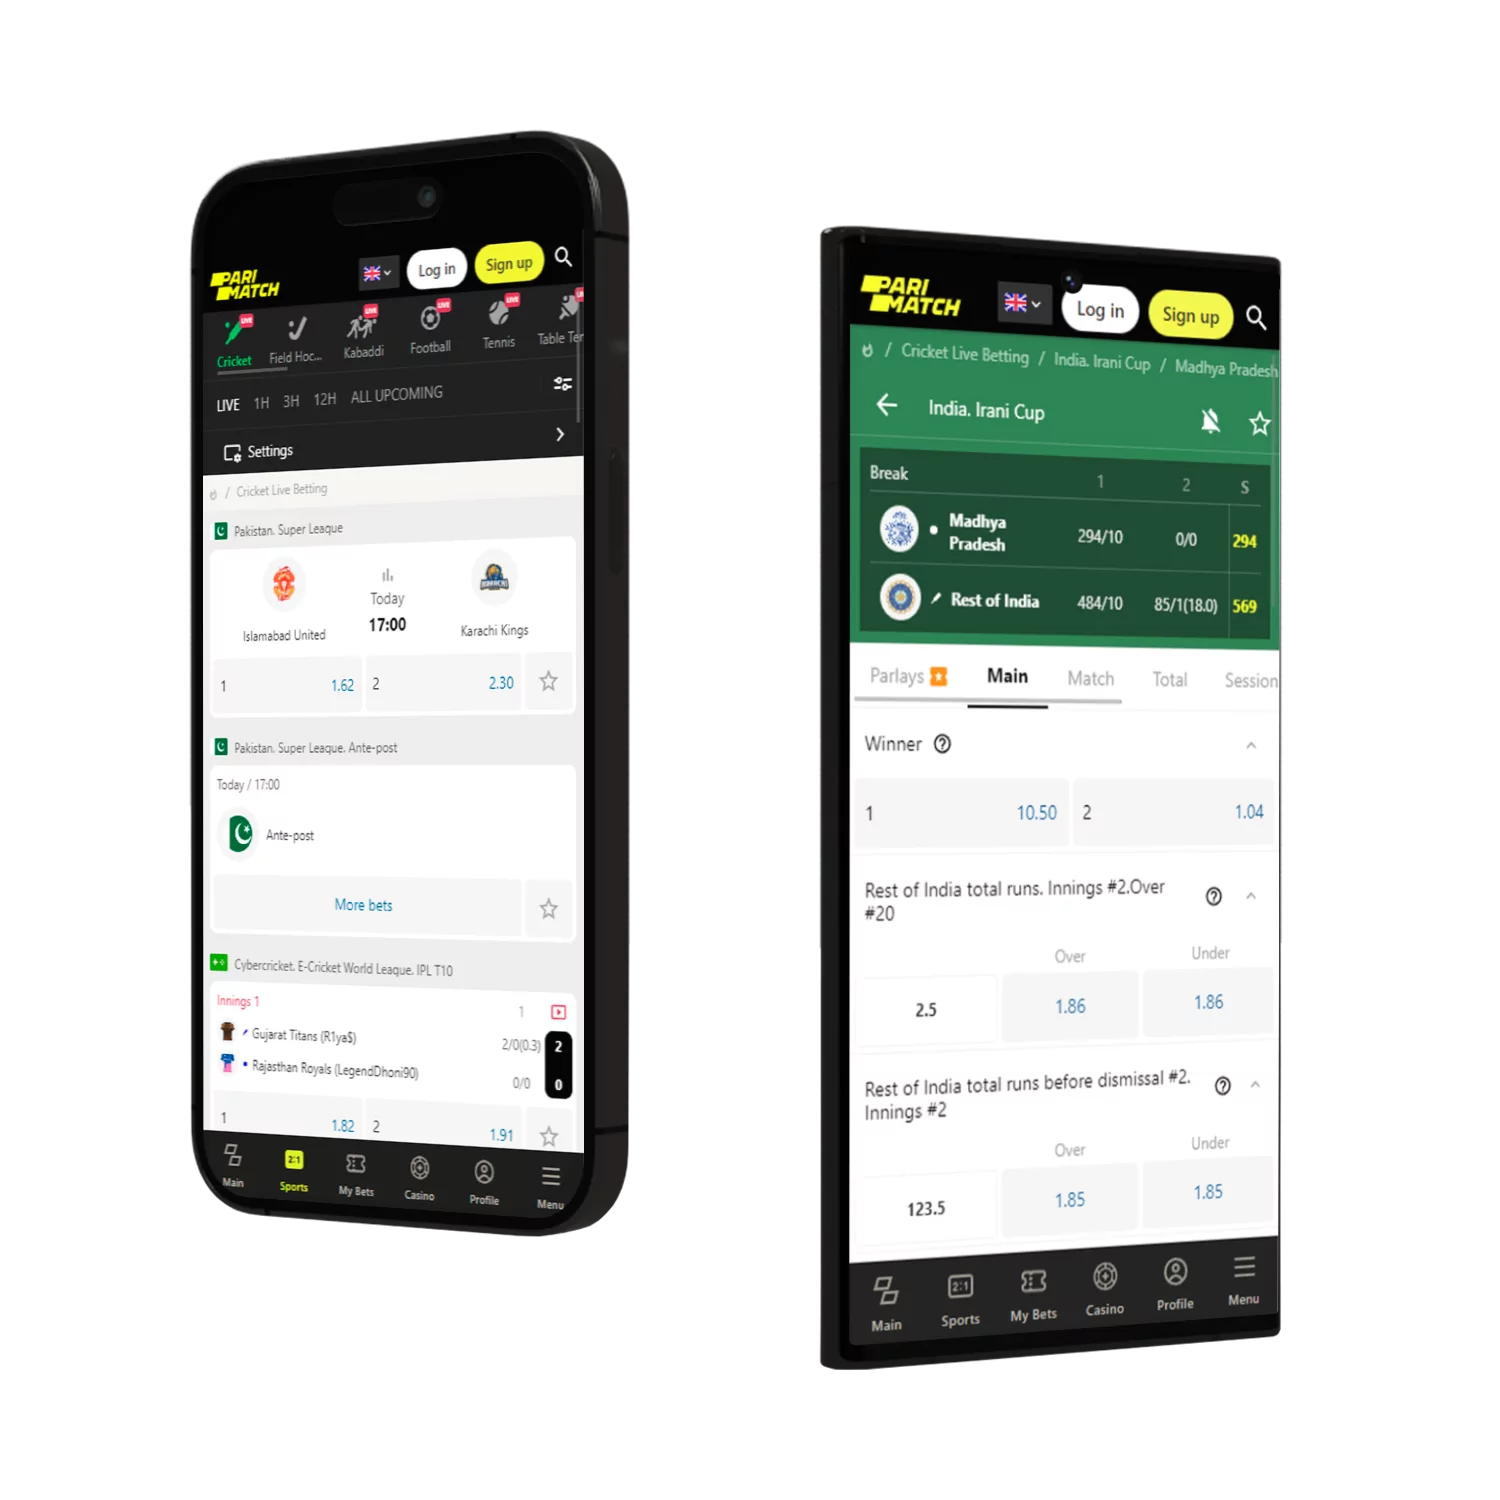 You can place bets on live cricket events in the Parimatch app.